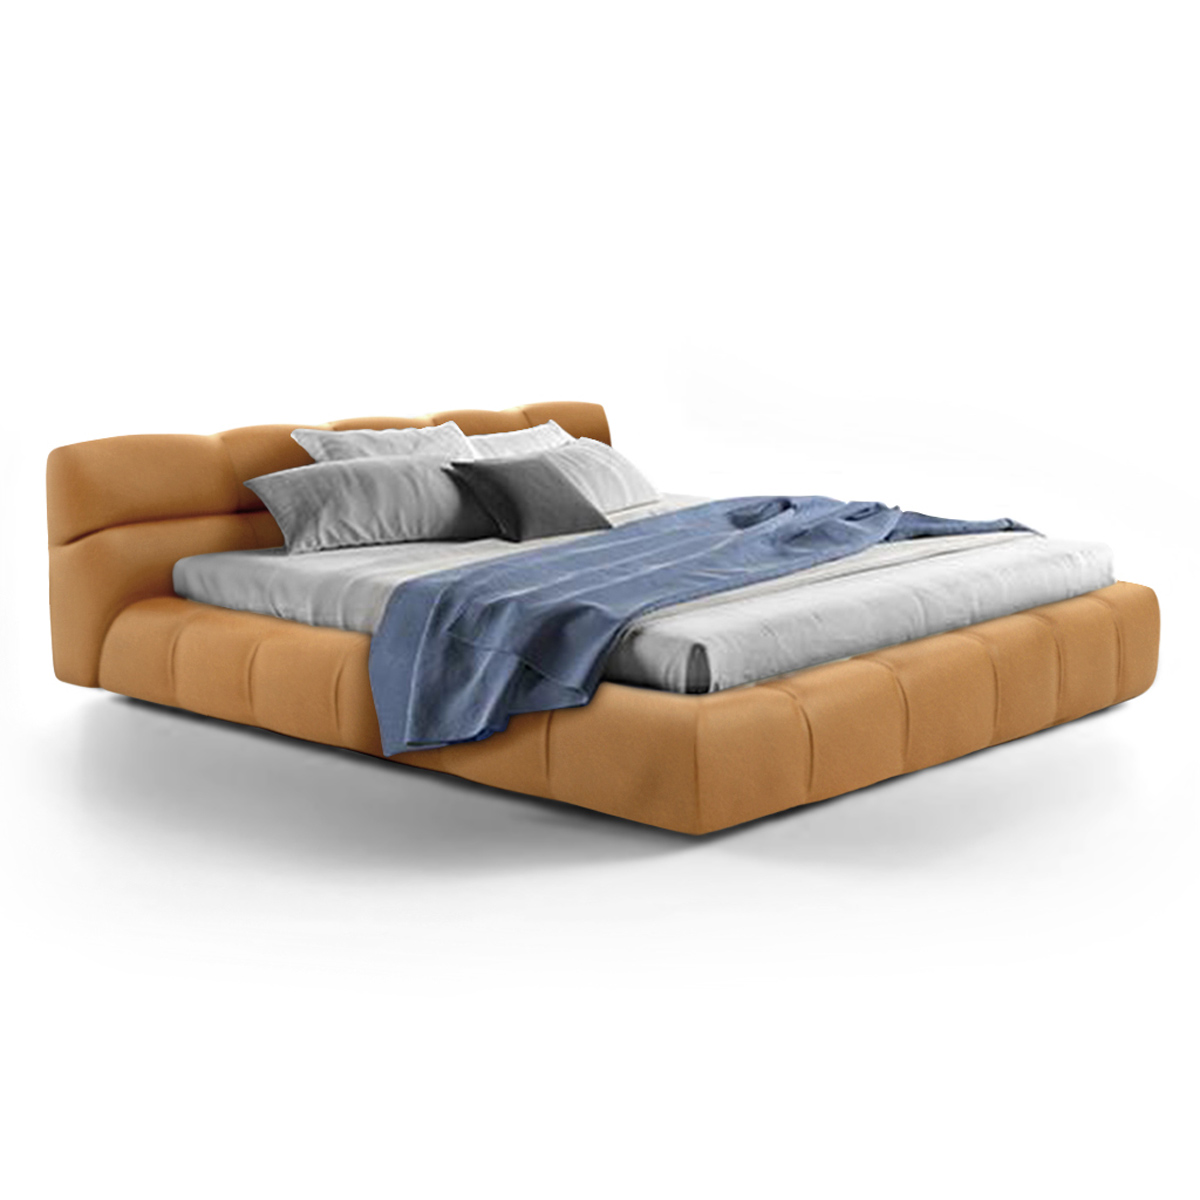 Tufted Bed Aniline Leather-Beige / Queen Size